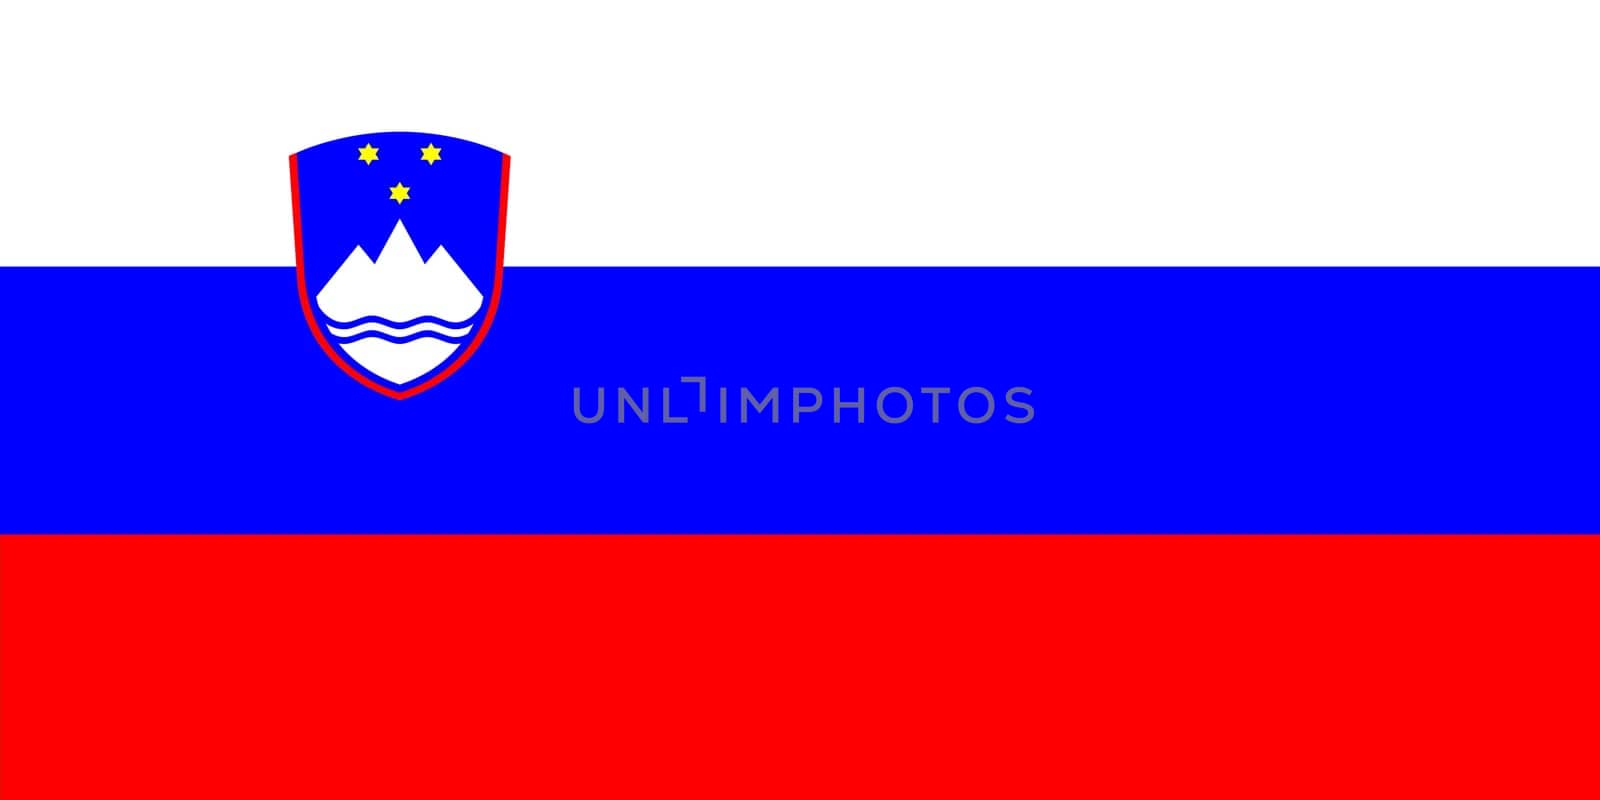 Slovenia flag background illustration red blue white by VivacityImages